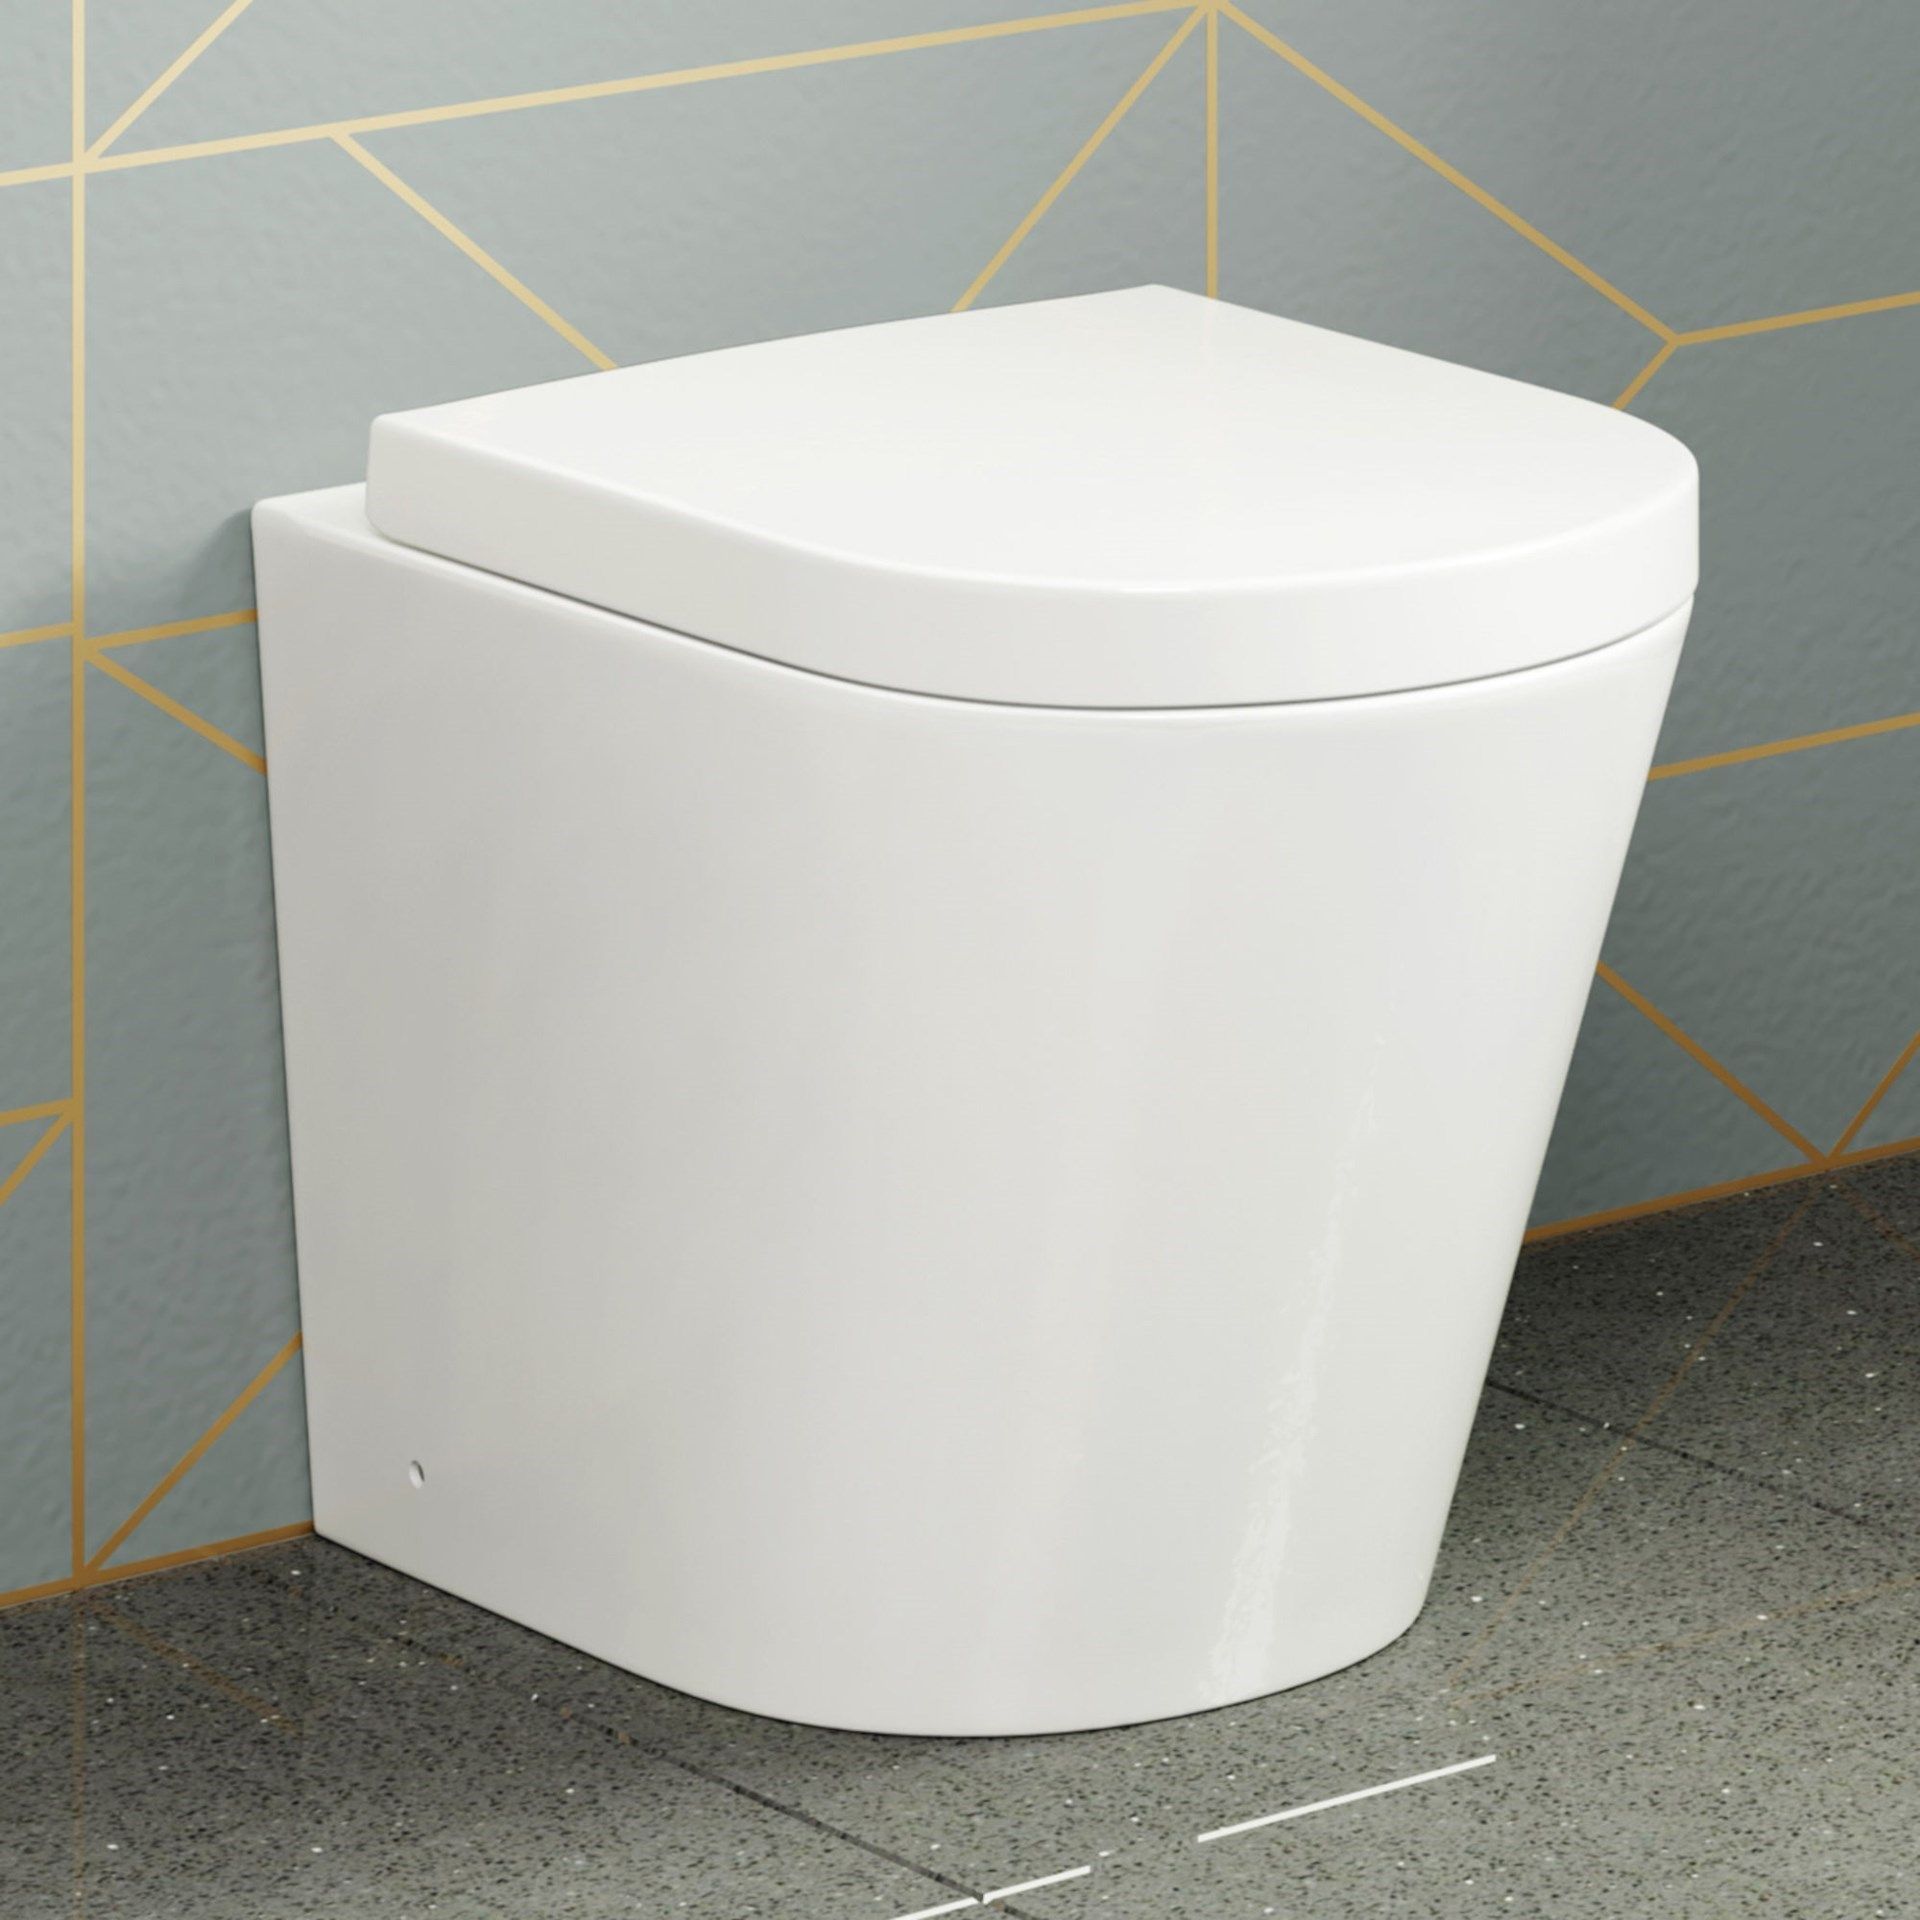 Lyon Back To Wall Toilet with Soft Close Seat. 632BTW. Our Lyon back to wall toilet is made fr...